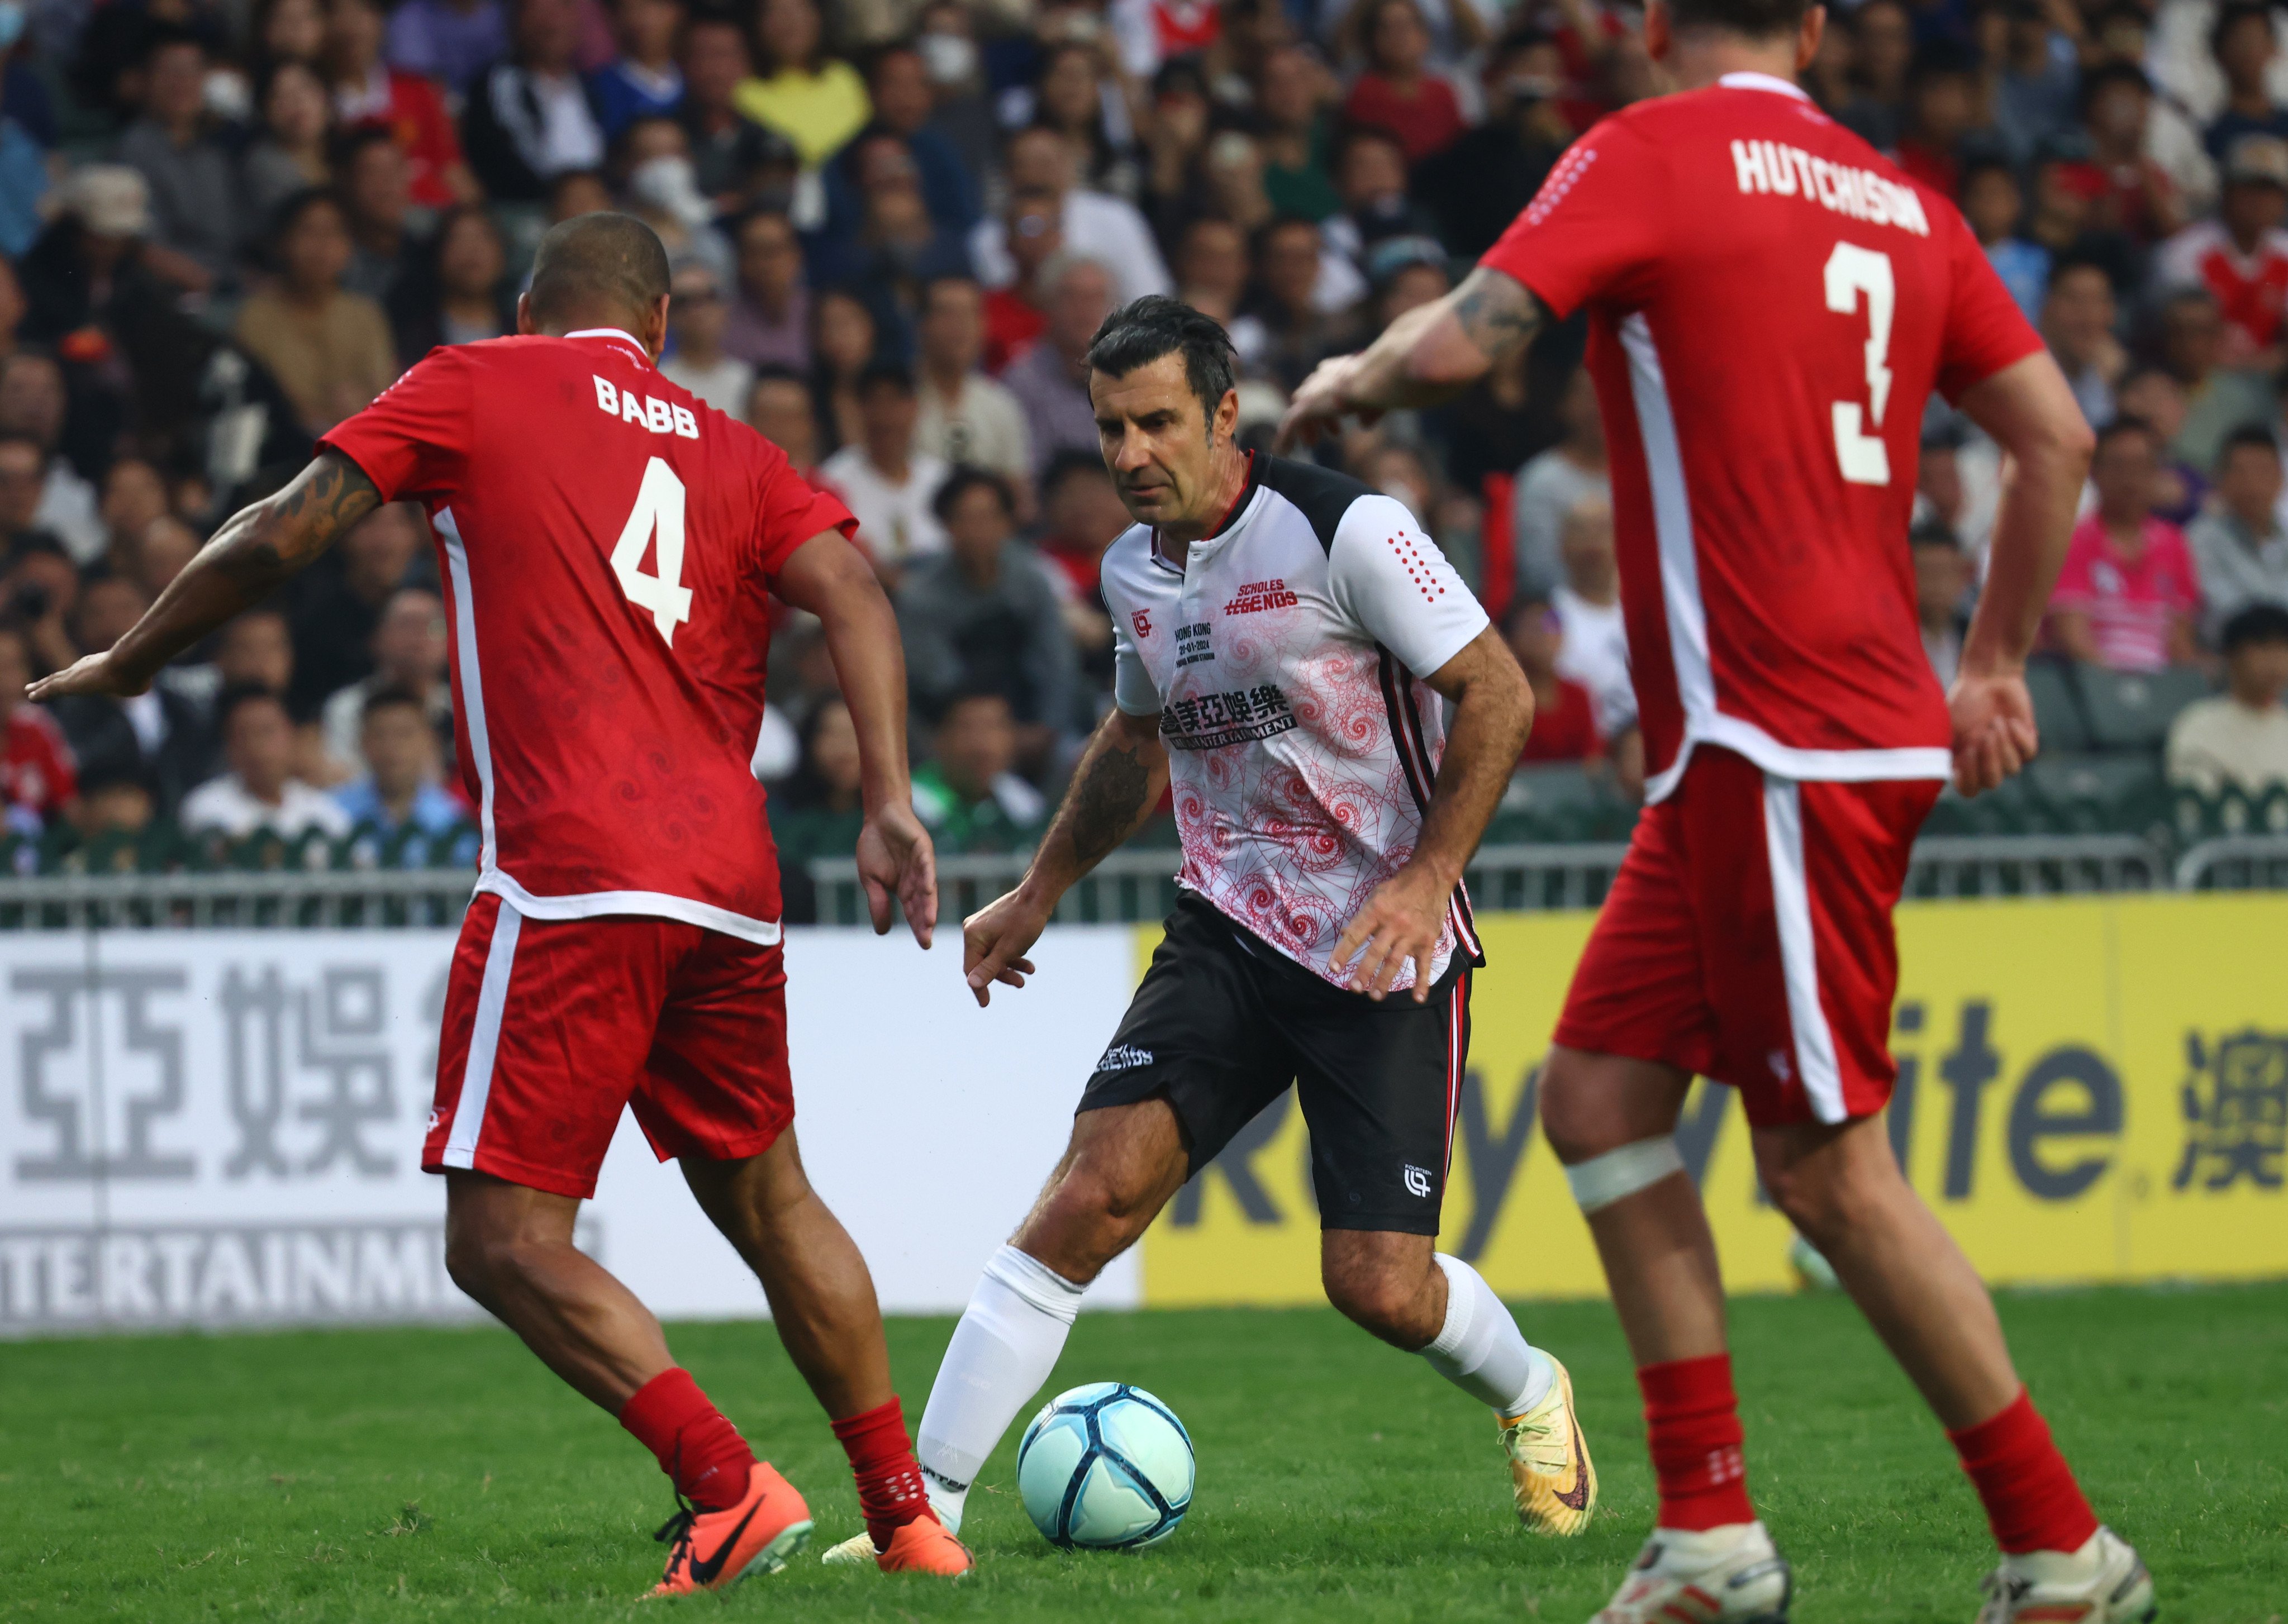 Luis Figo on the ball for the Scholes Legends at Hong Kong Stadium. Photo: Dickson Lee